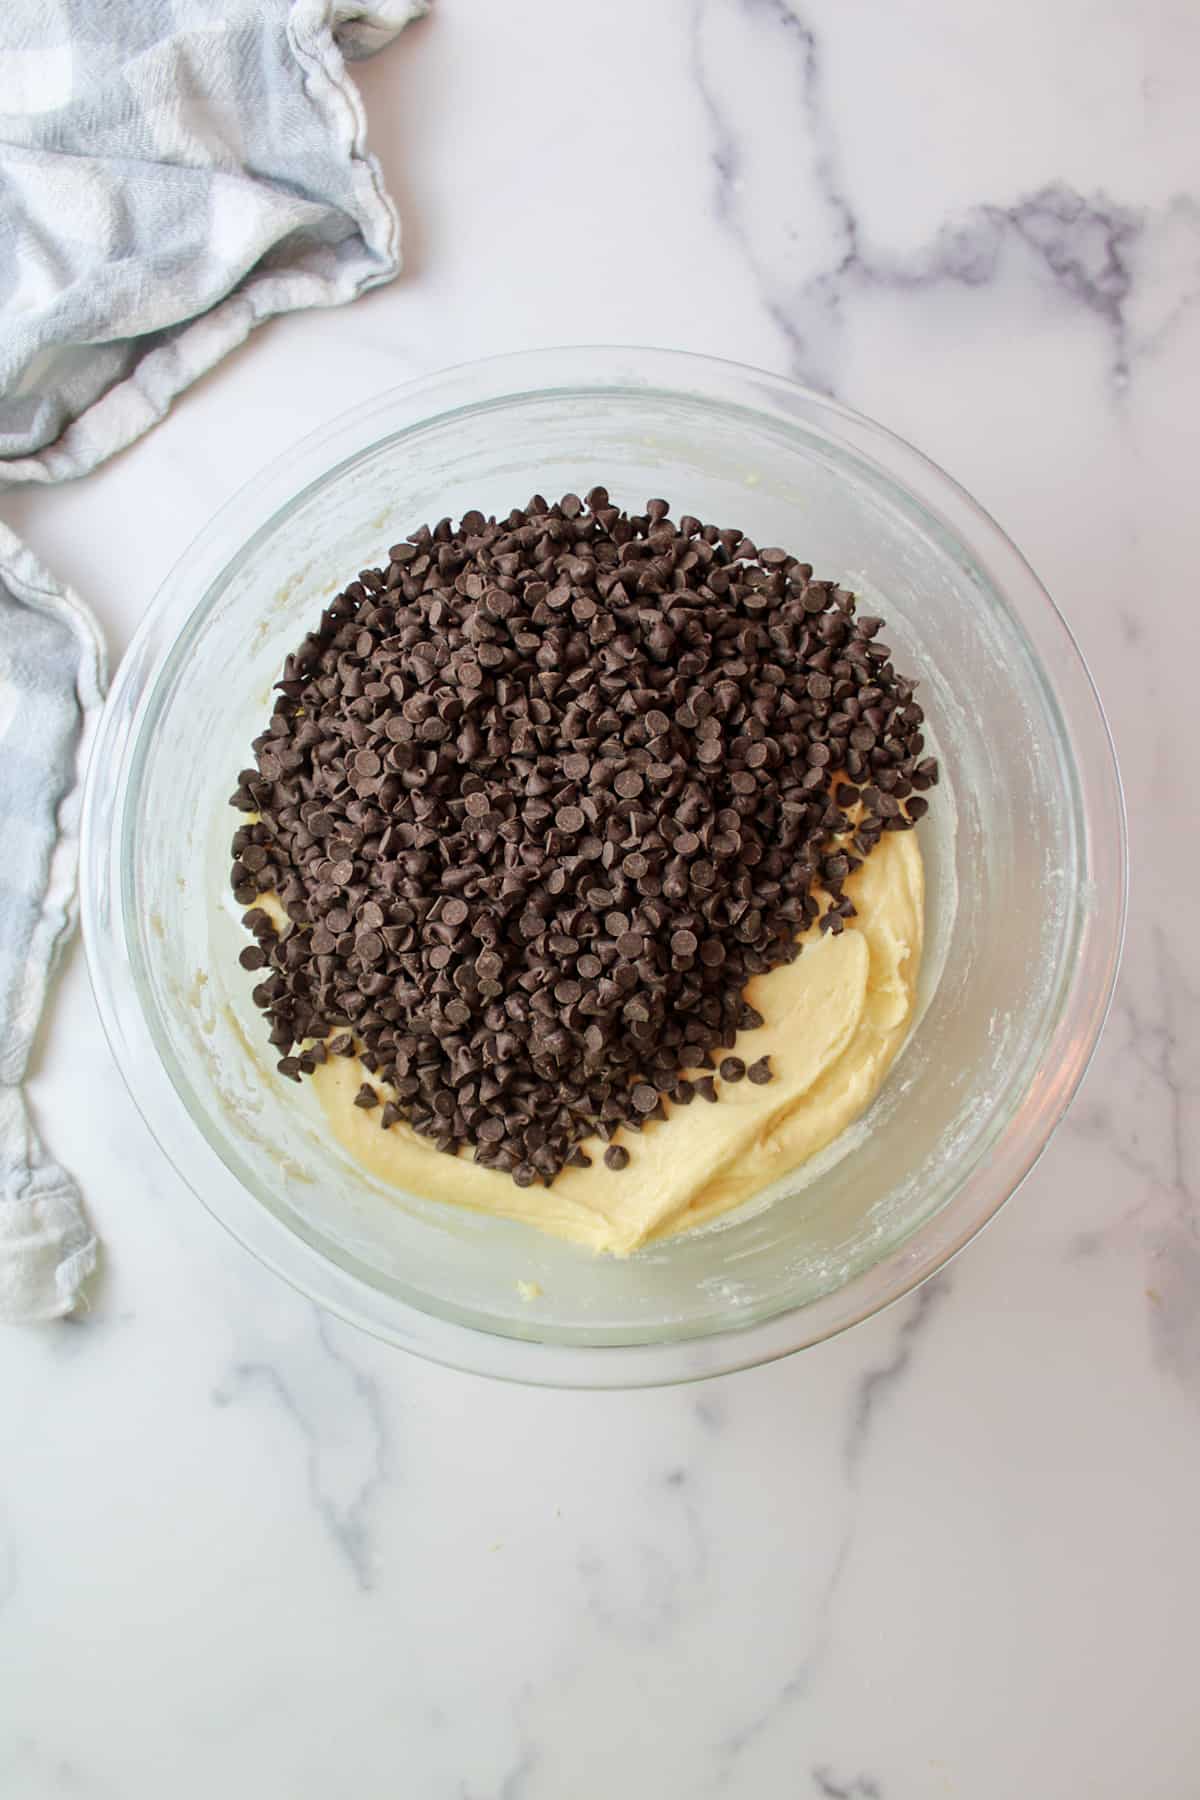 mini chocolate chips on top of cake batter in a mixing bowl